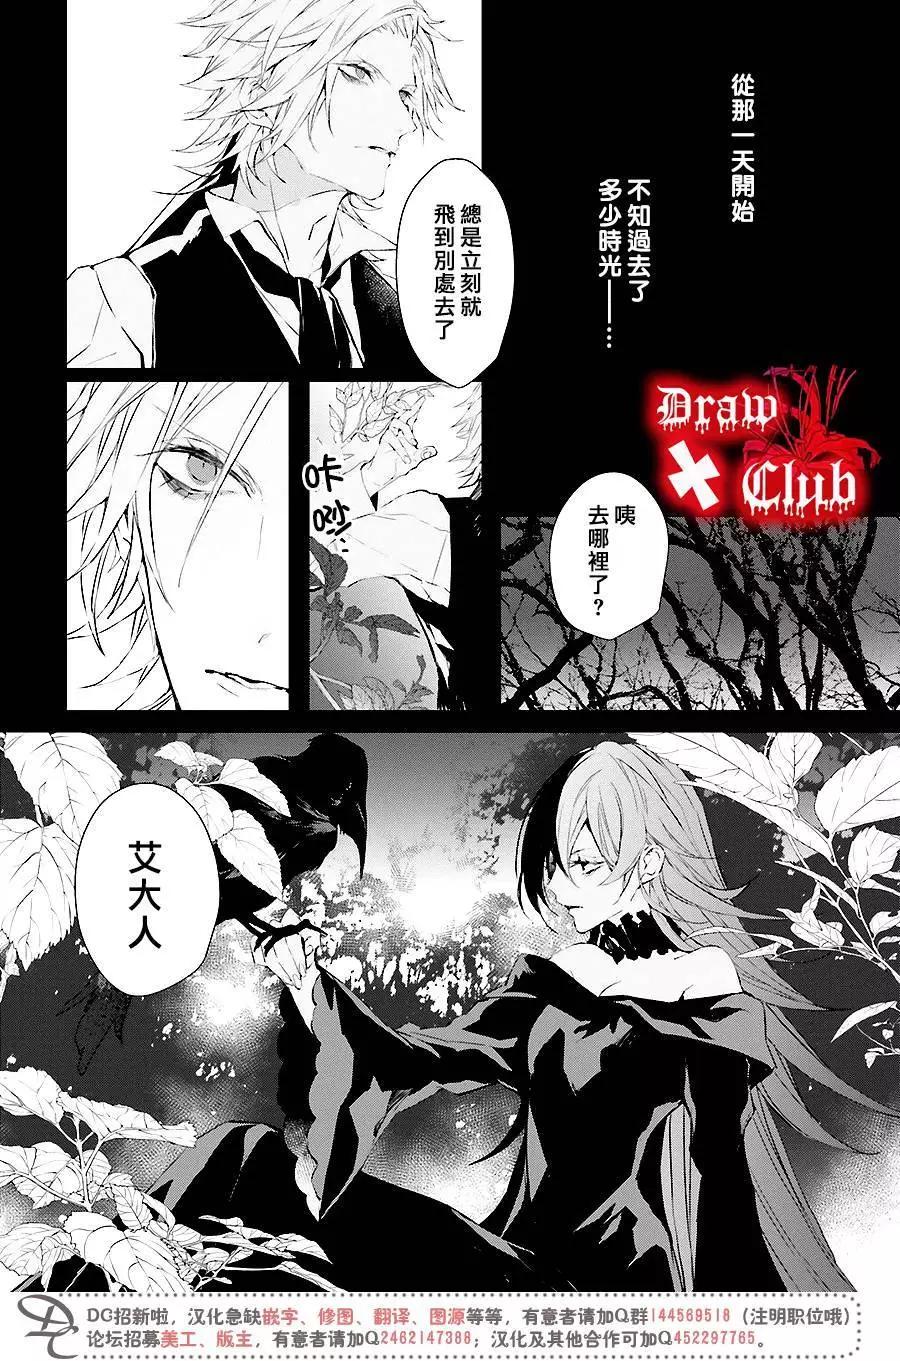 Bloody Mary - 第35回 - 6